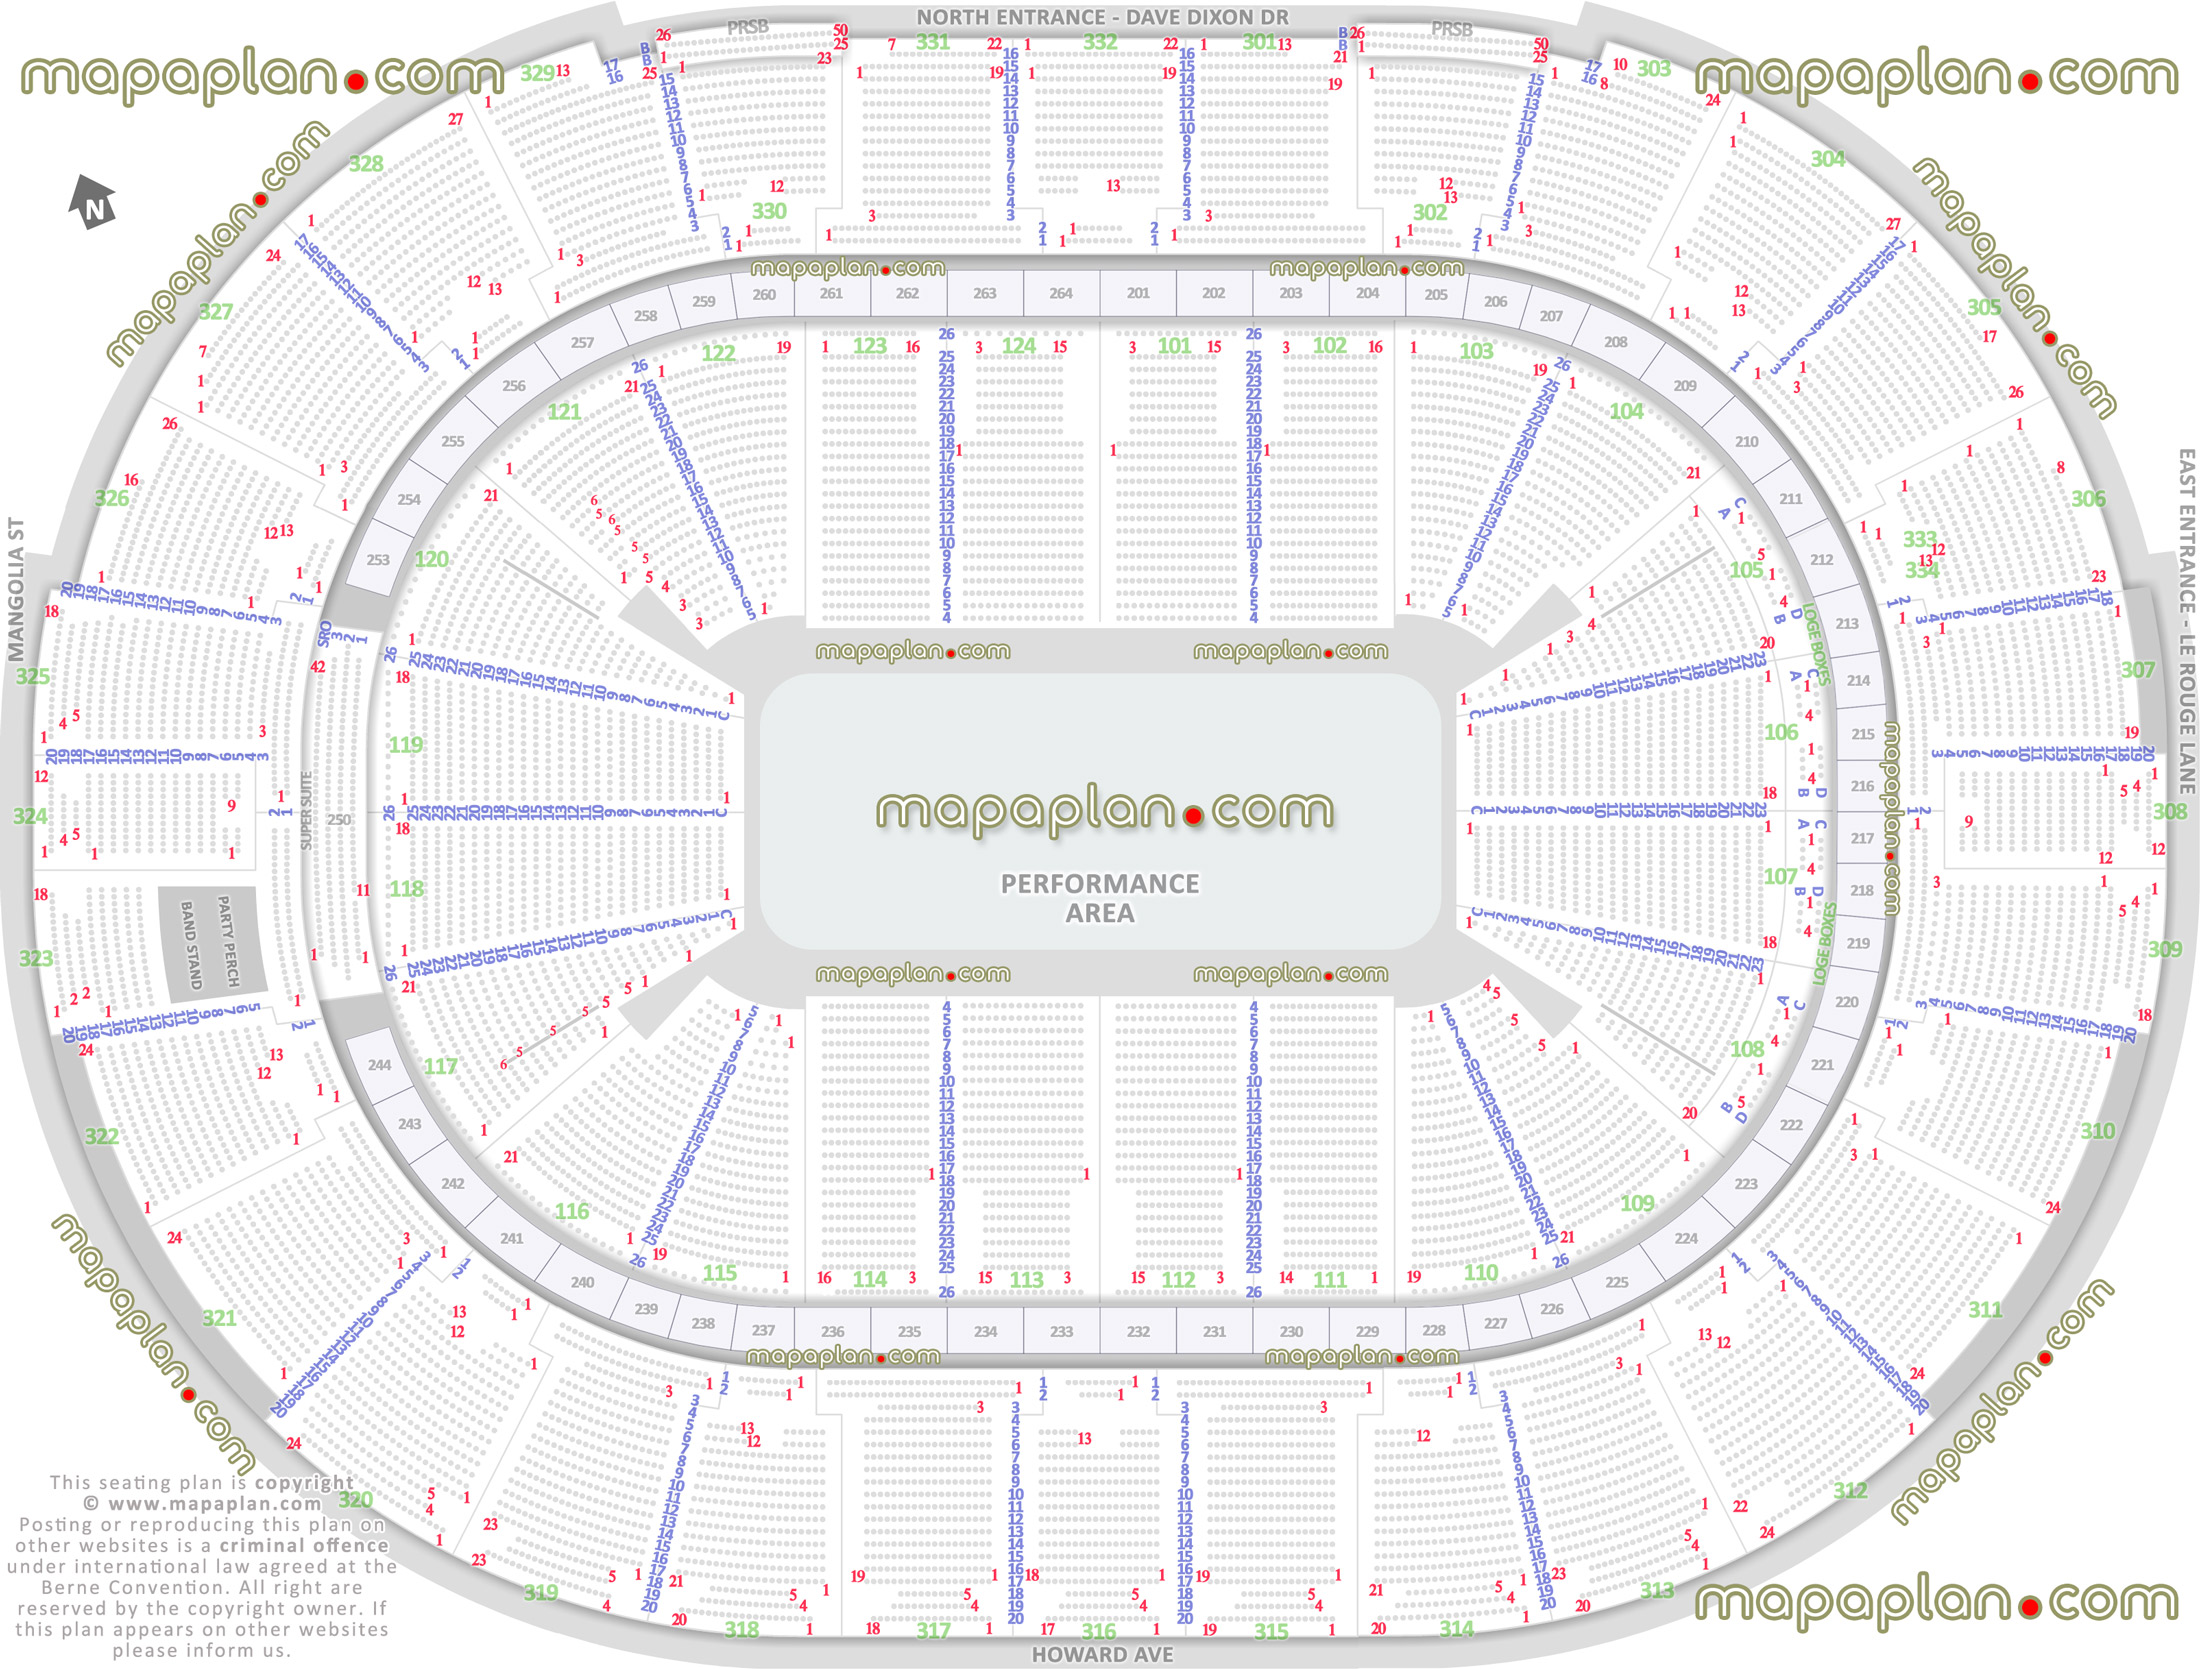 Smoothie King Arena 3d Seating Chart